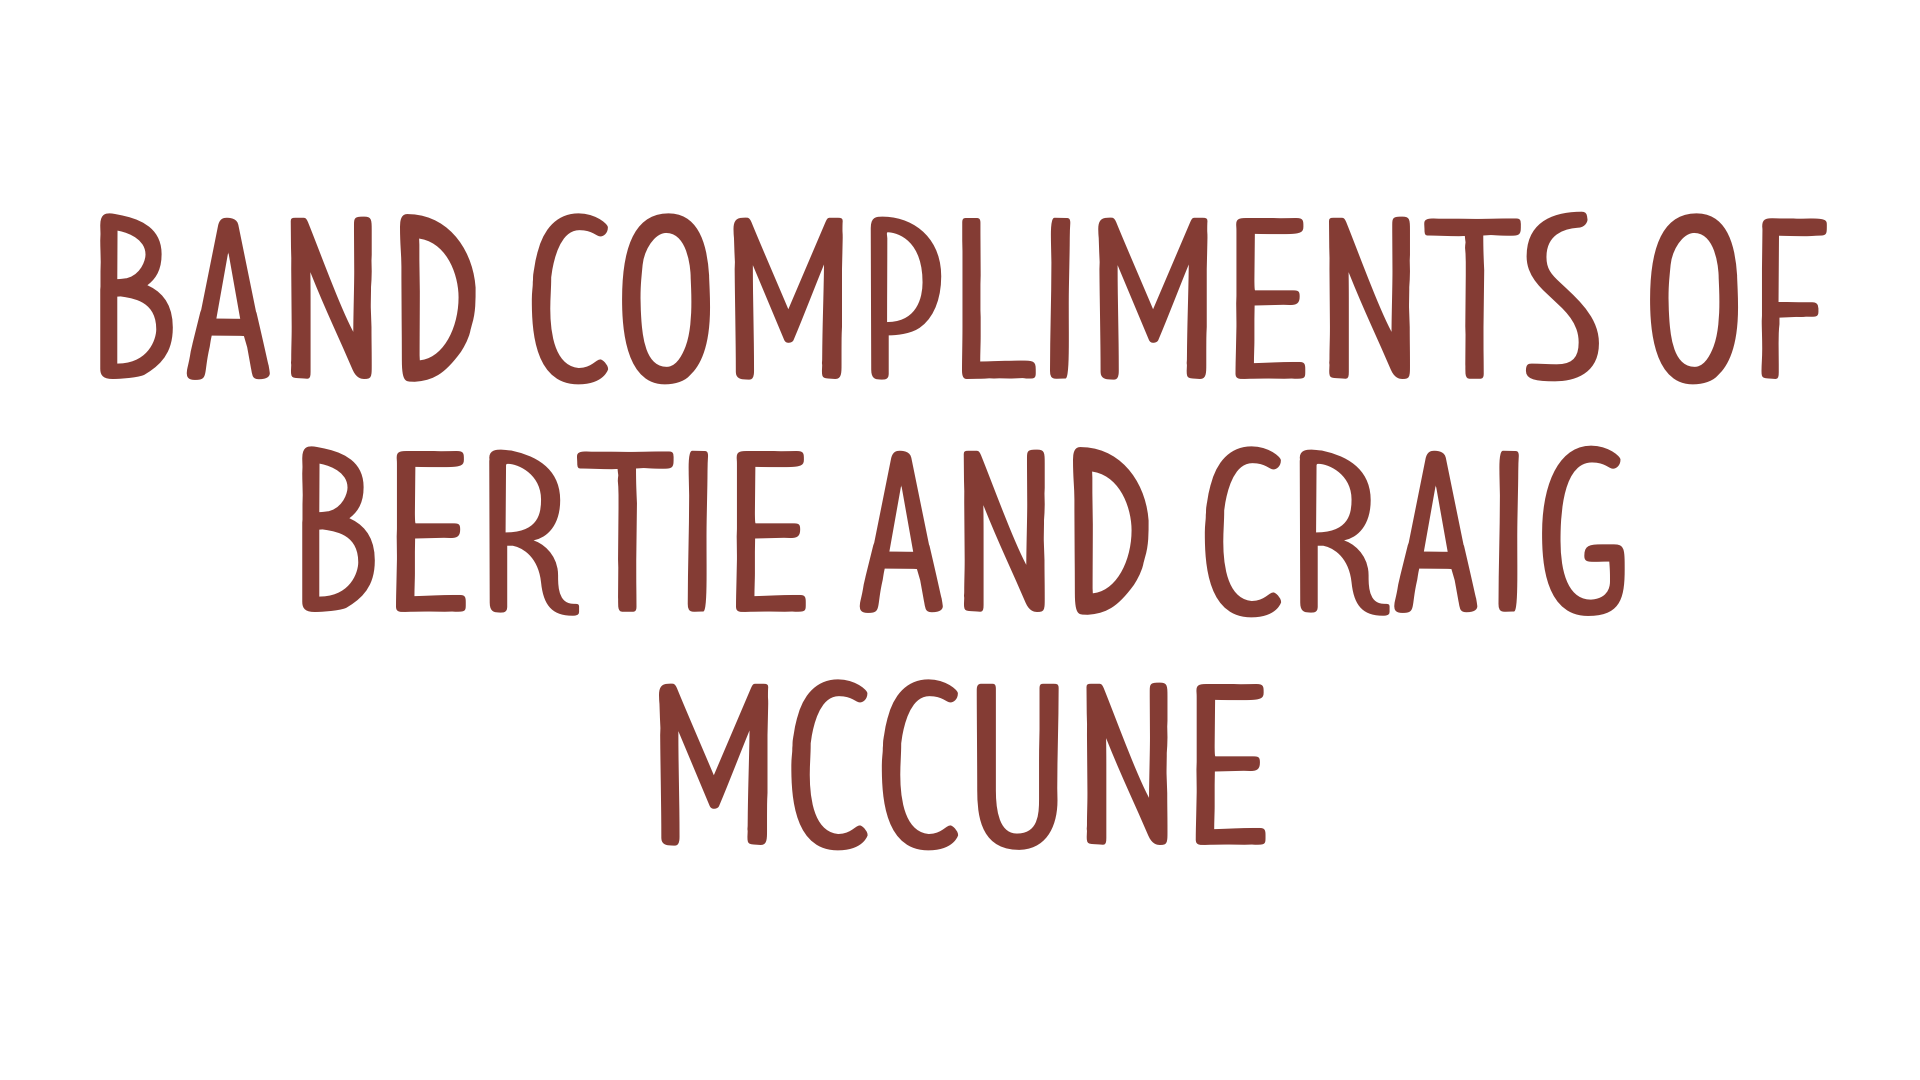 BAND compliment of McCune